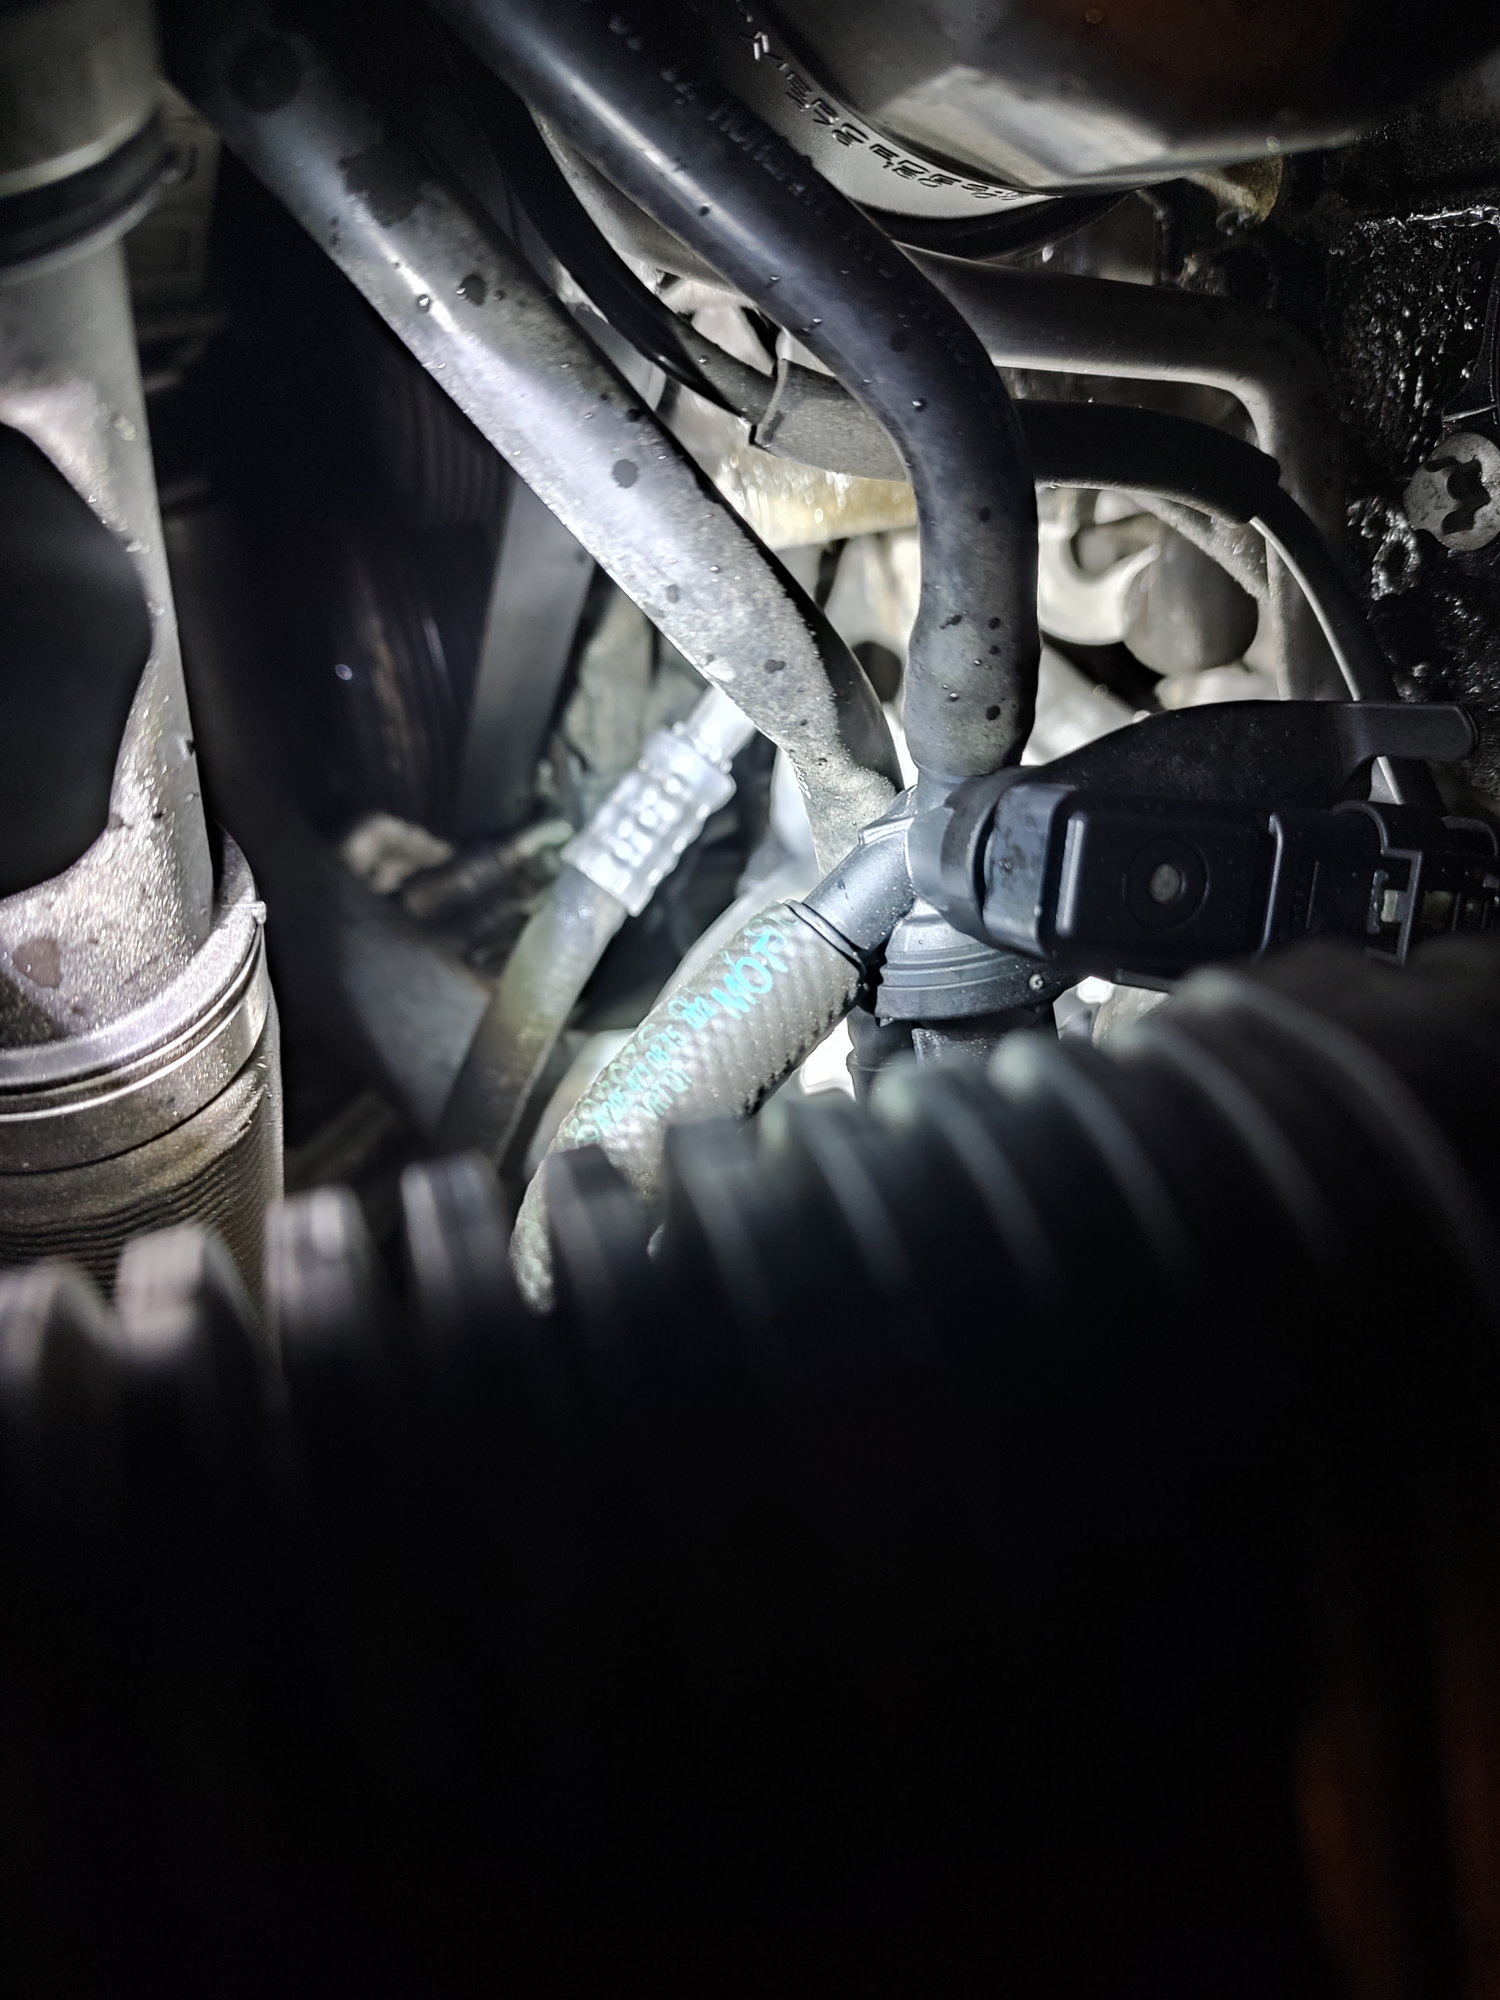 2016 c450 amg m276.3 oil leak (help identifying these parts please ...